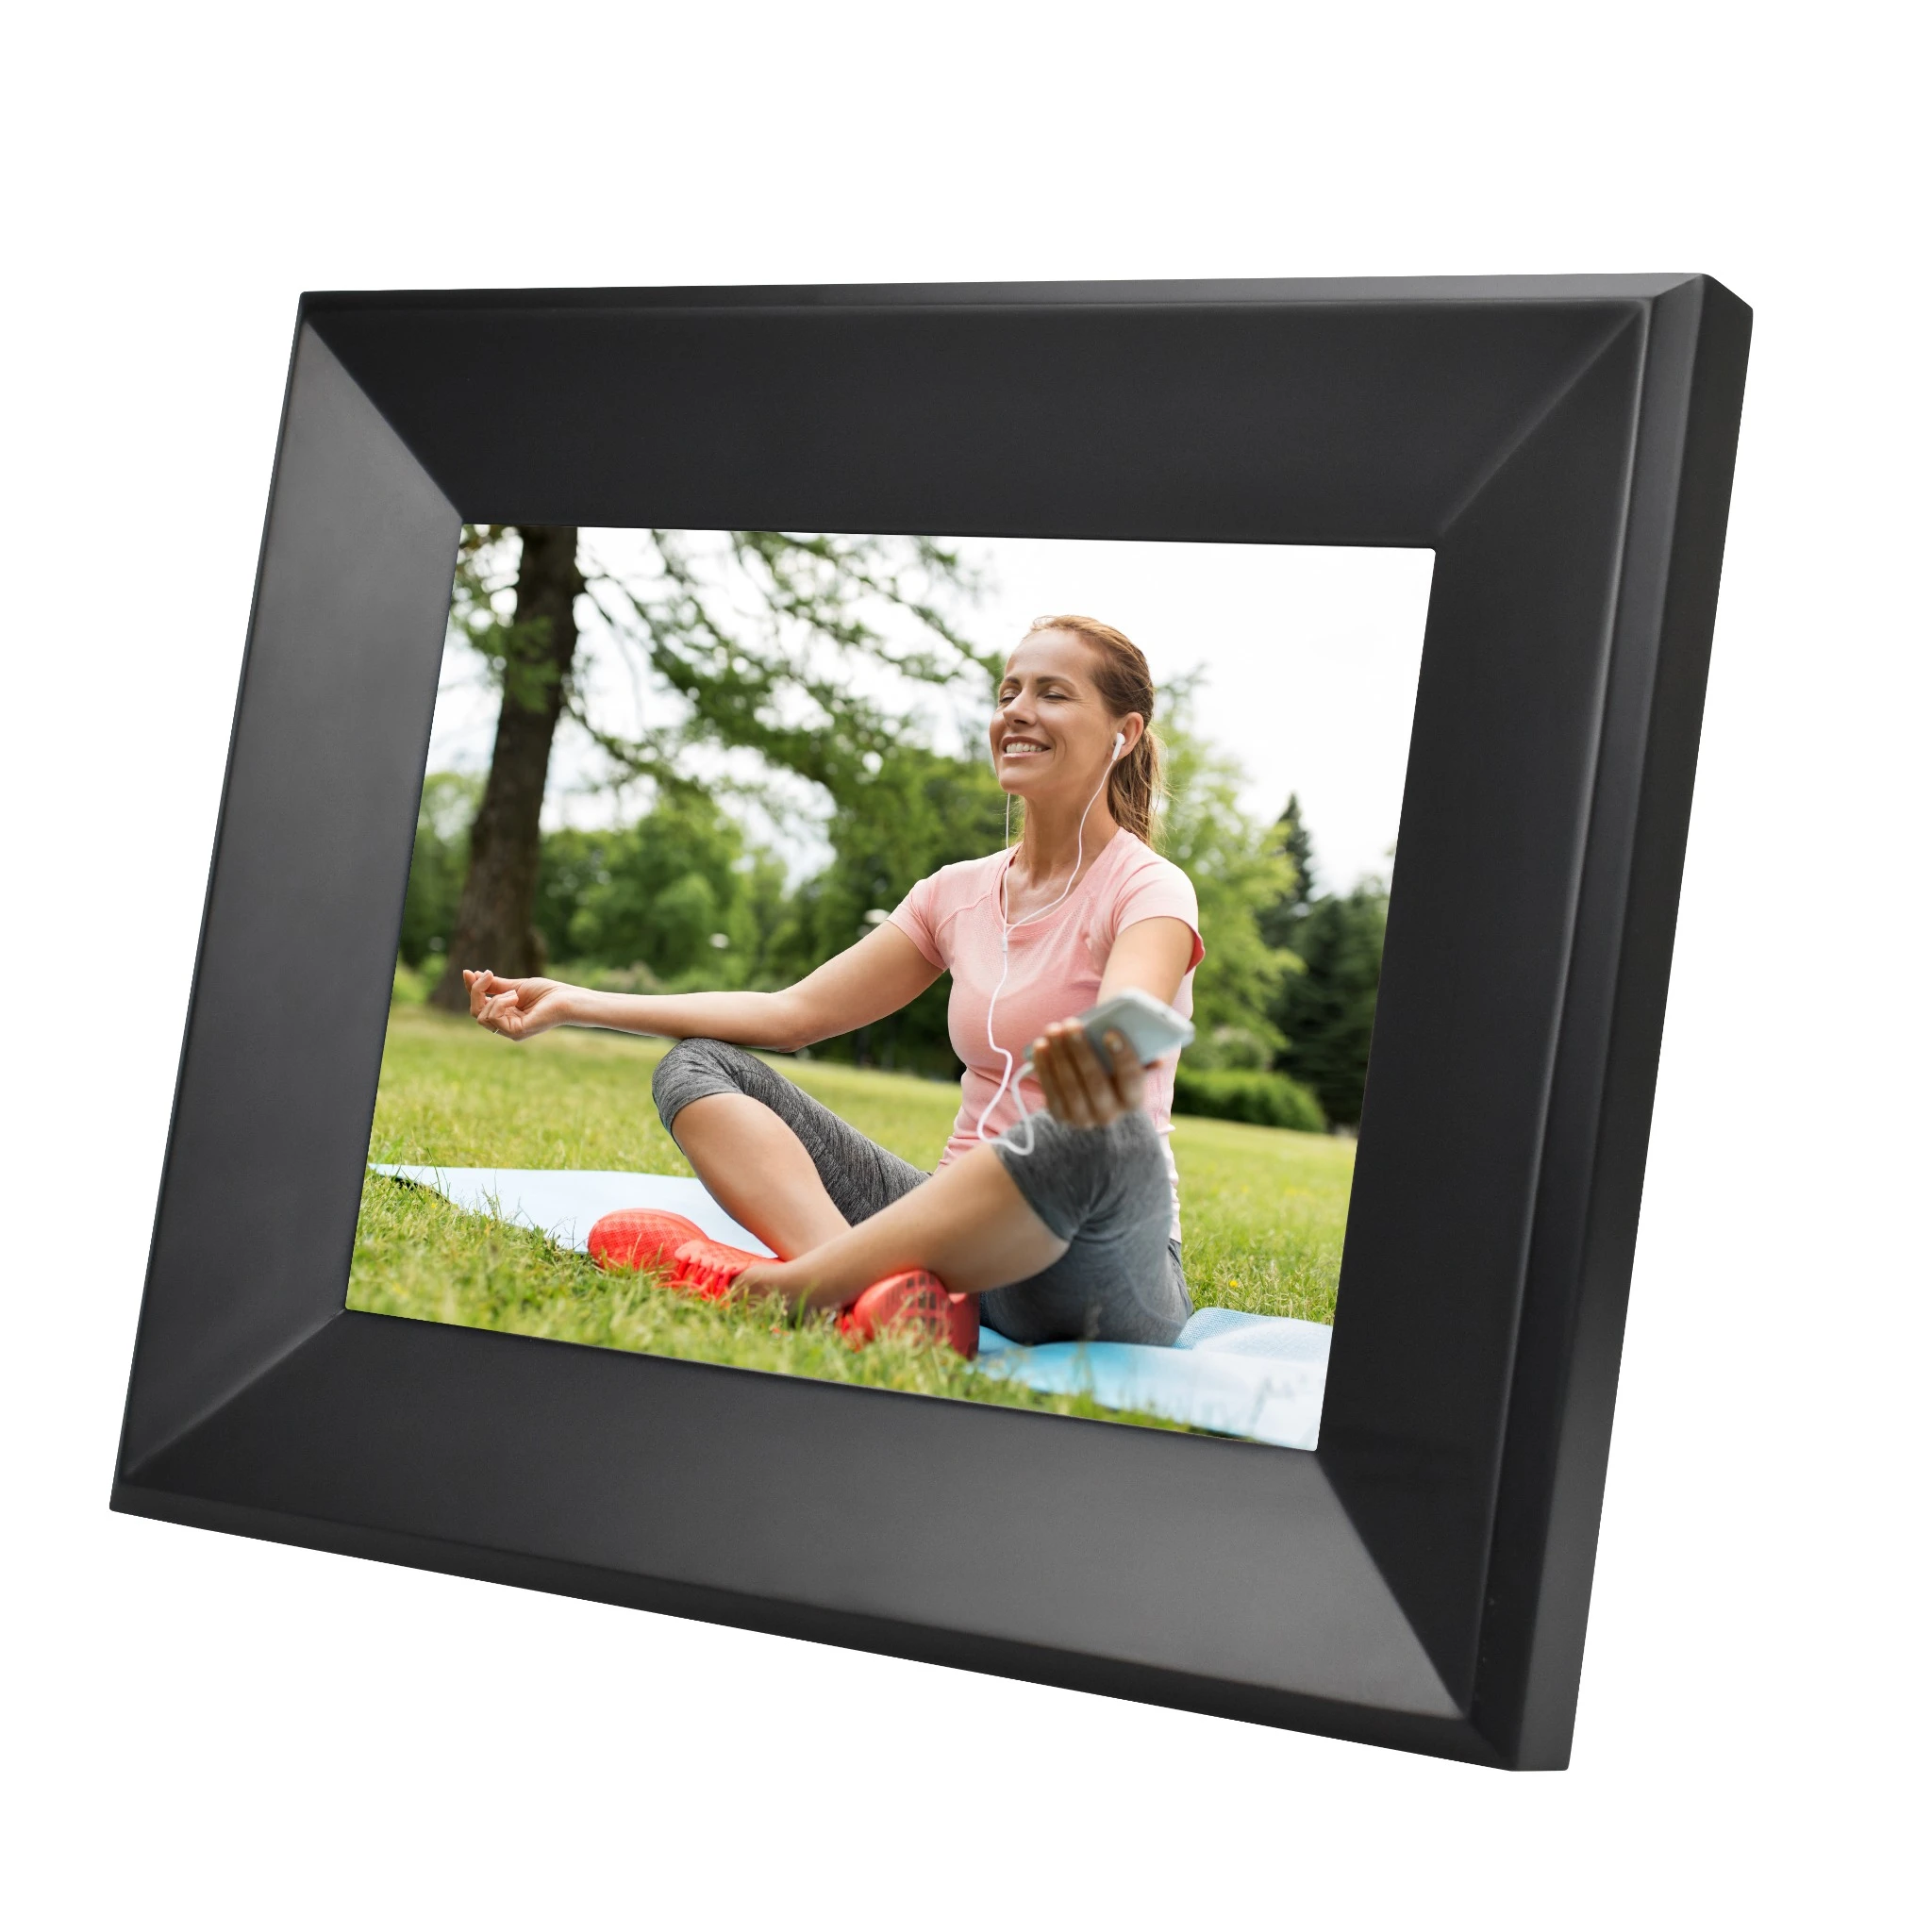 

High Quality Wooden 8" 1024*768 Digital Art Frame WiFi Video Clip Playing WiFi Photo Frame Sharing Video and Photo Instantly, Black white